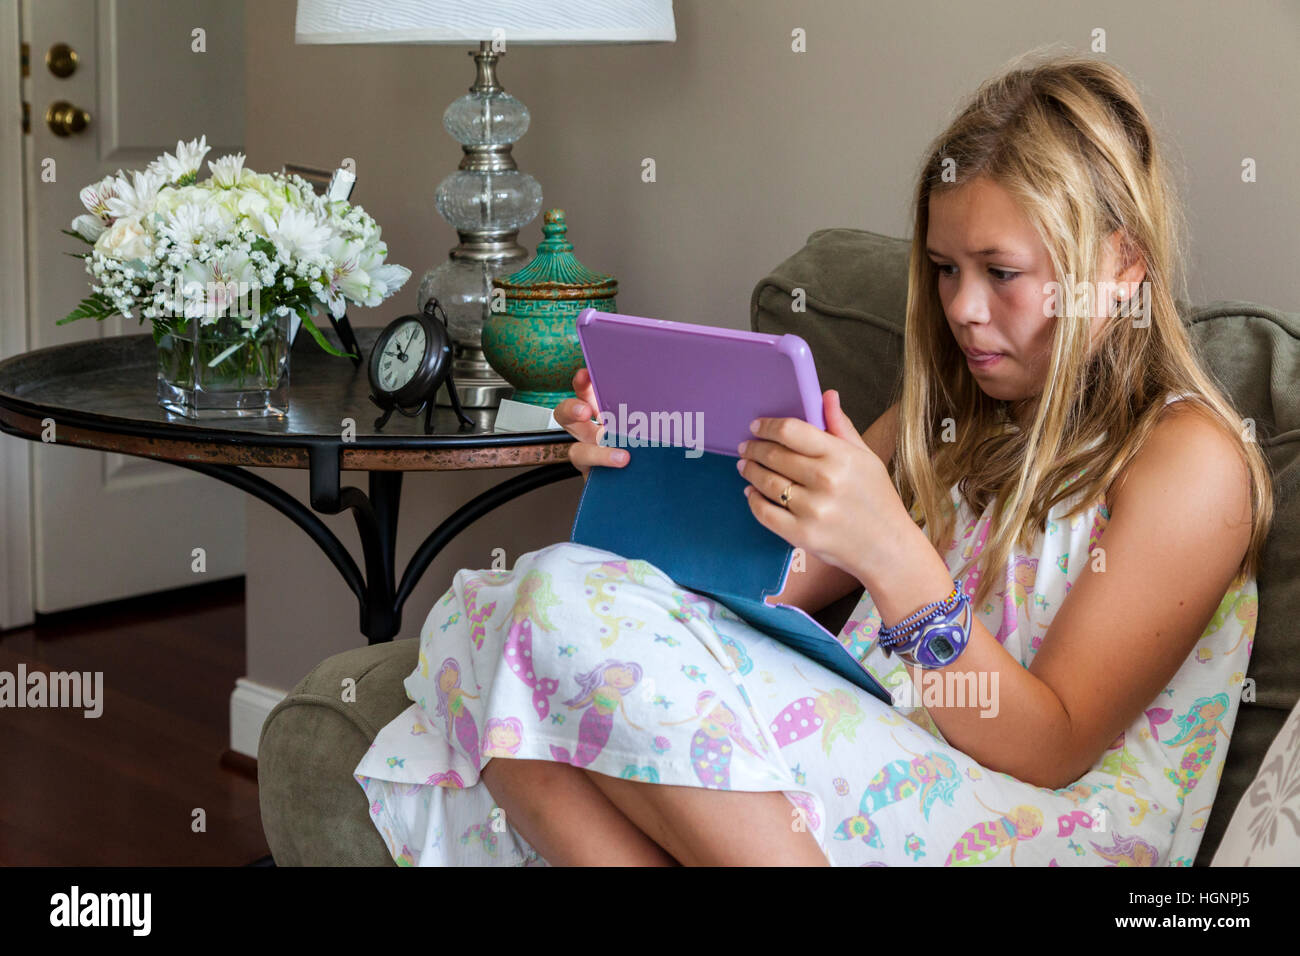 Eleven-year-old Girl Playing a game on iPad. Stock Photo